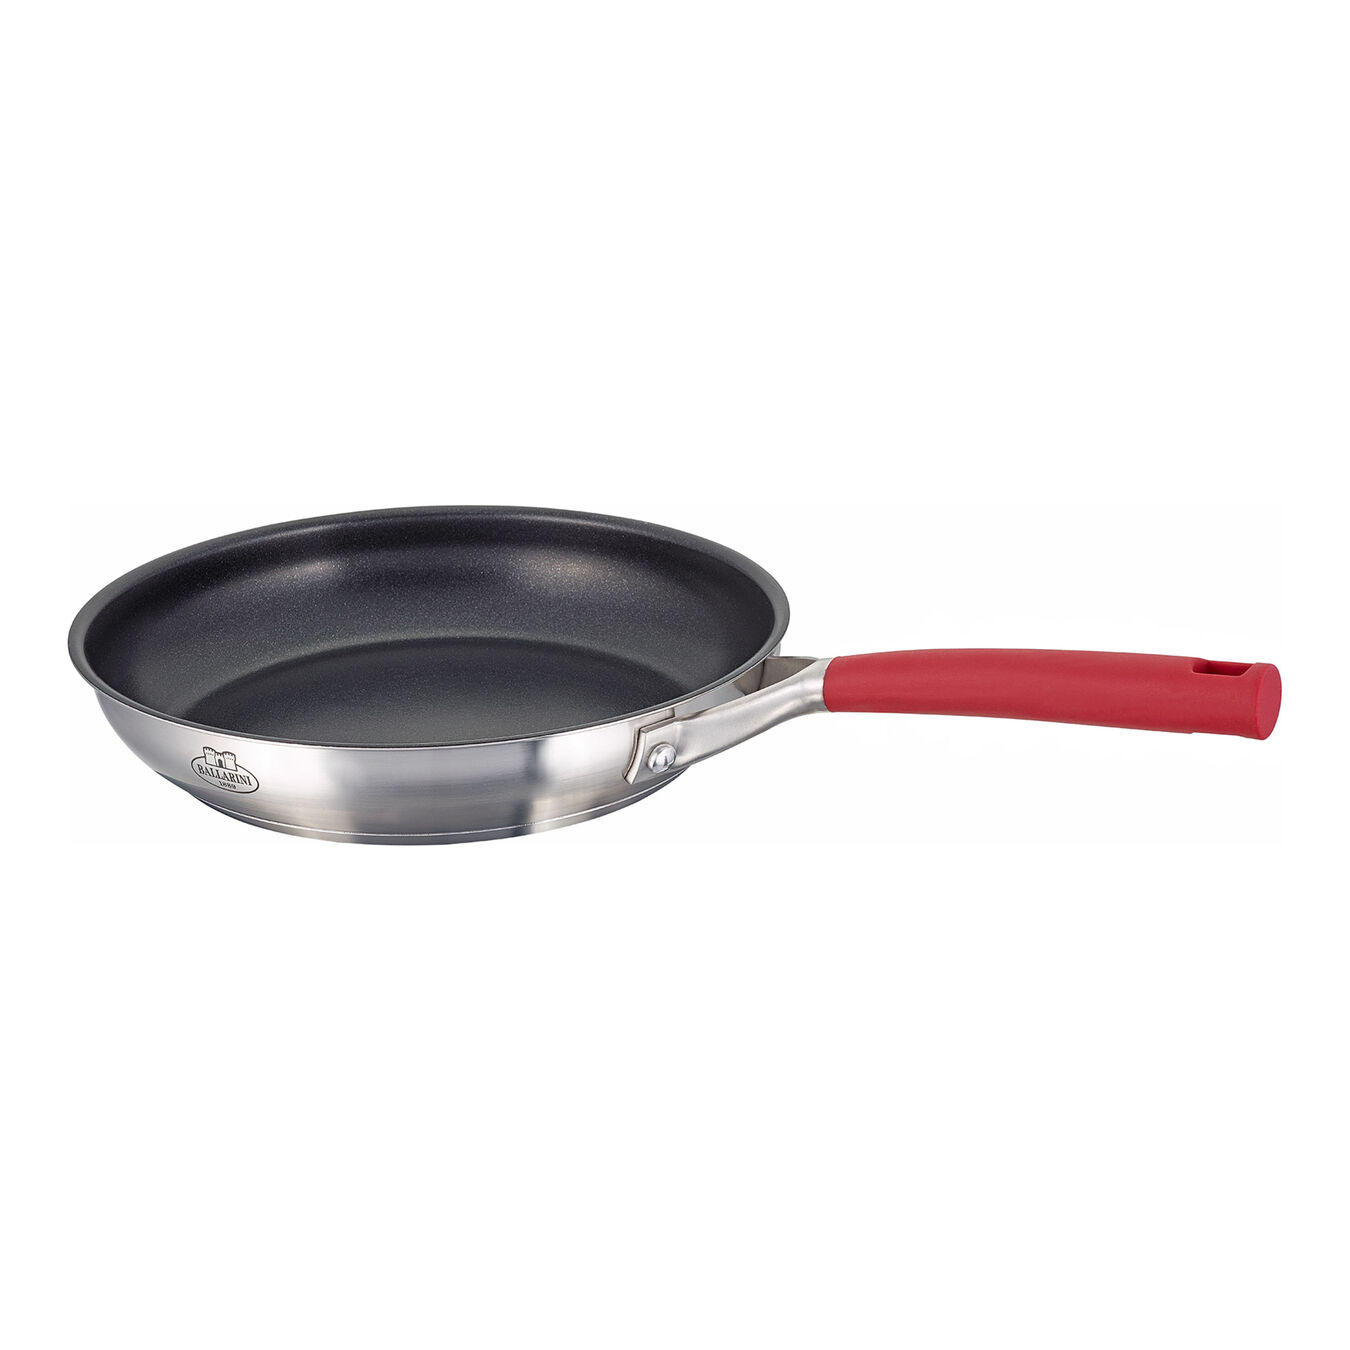 20 cm / 8 inch 18/10 Stainless Steel Frying pan,,large 1